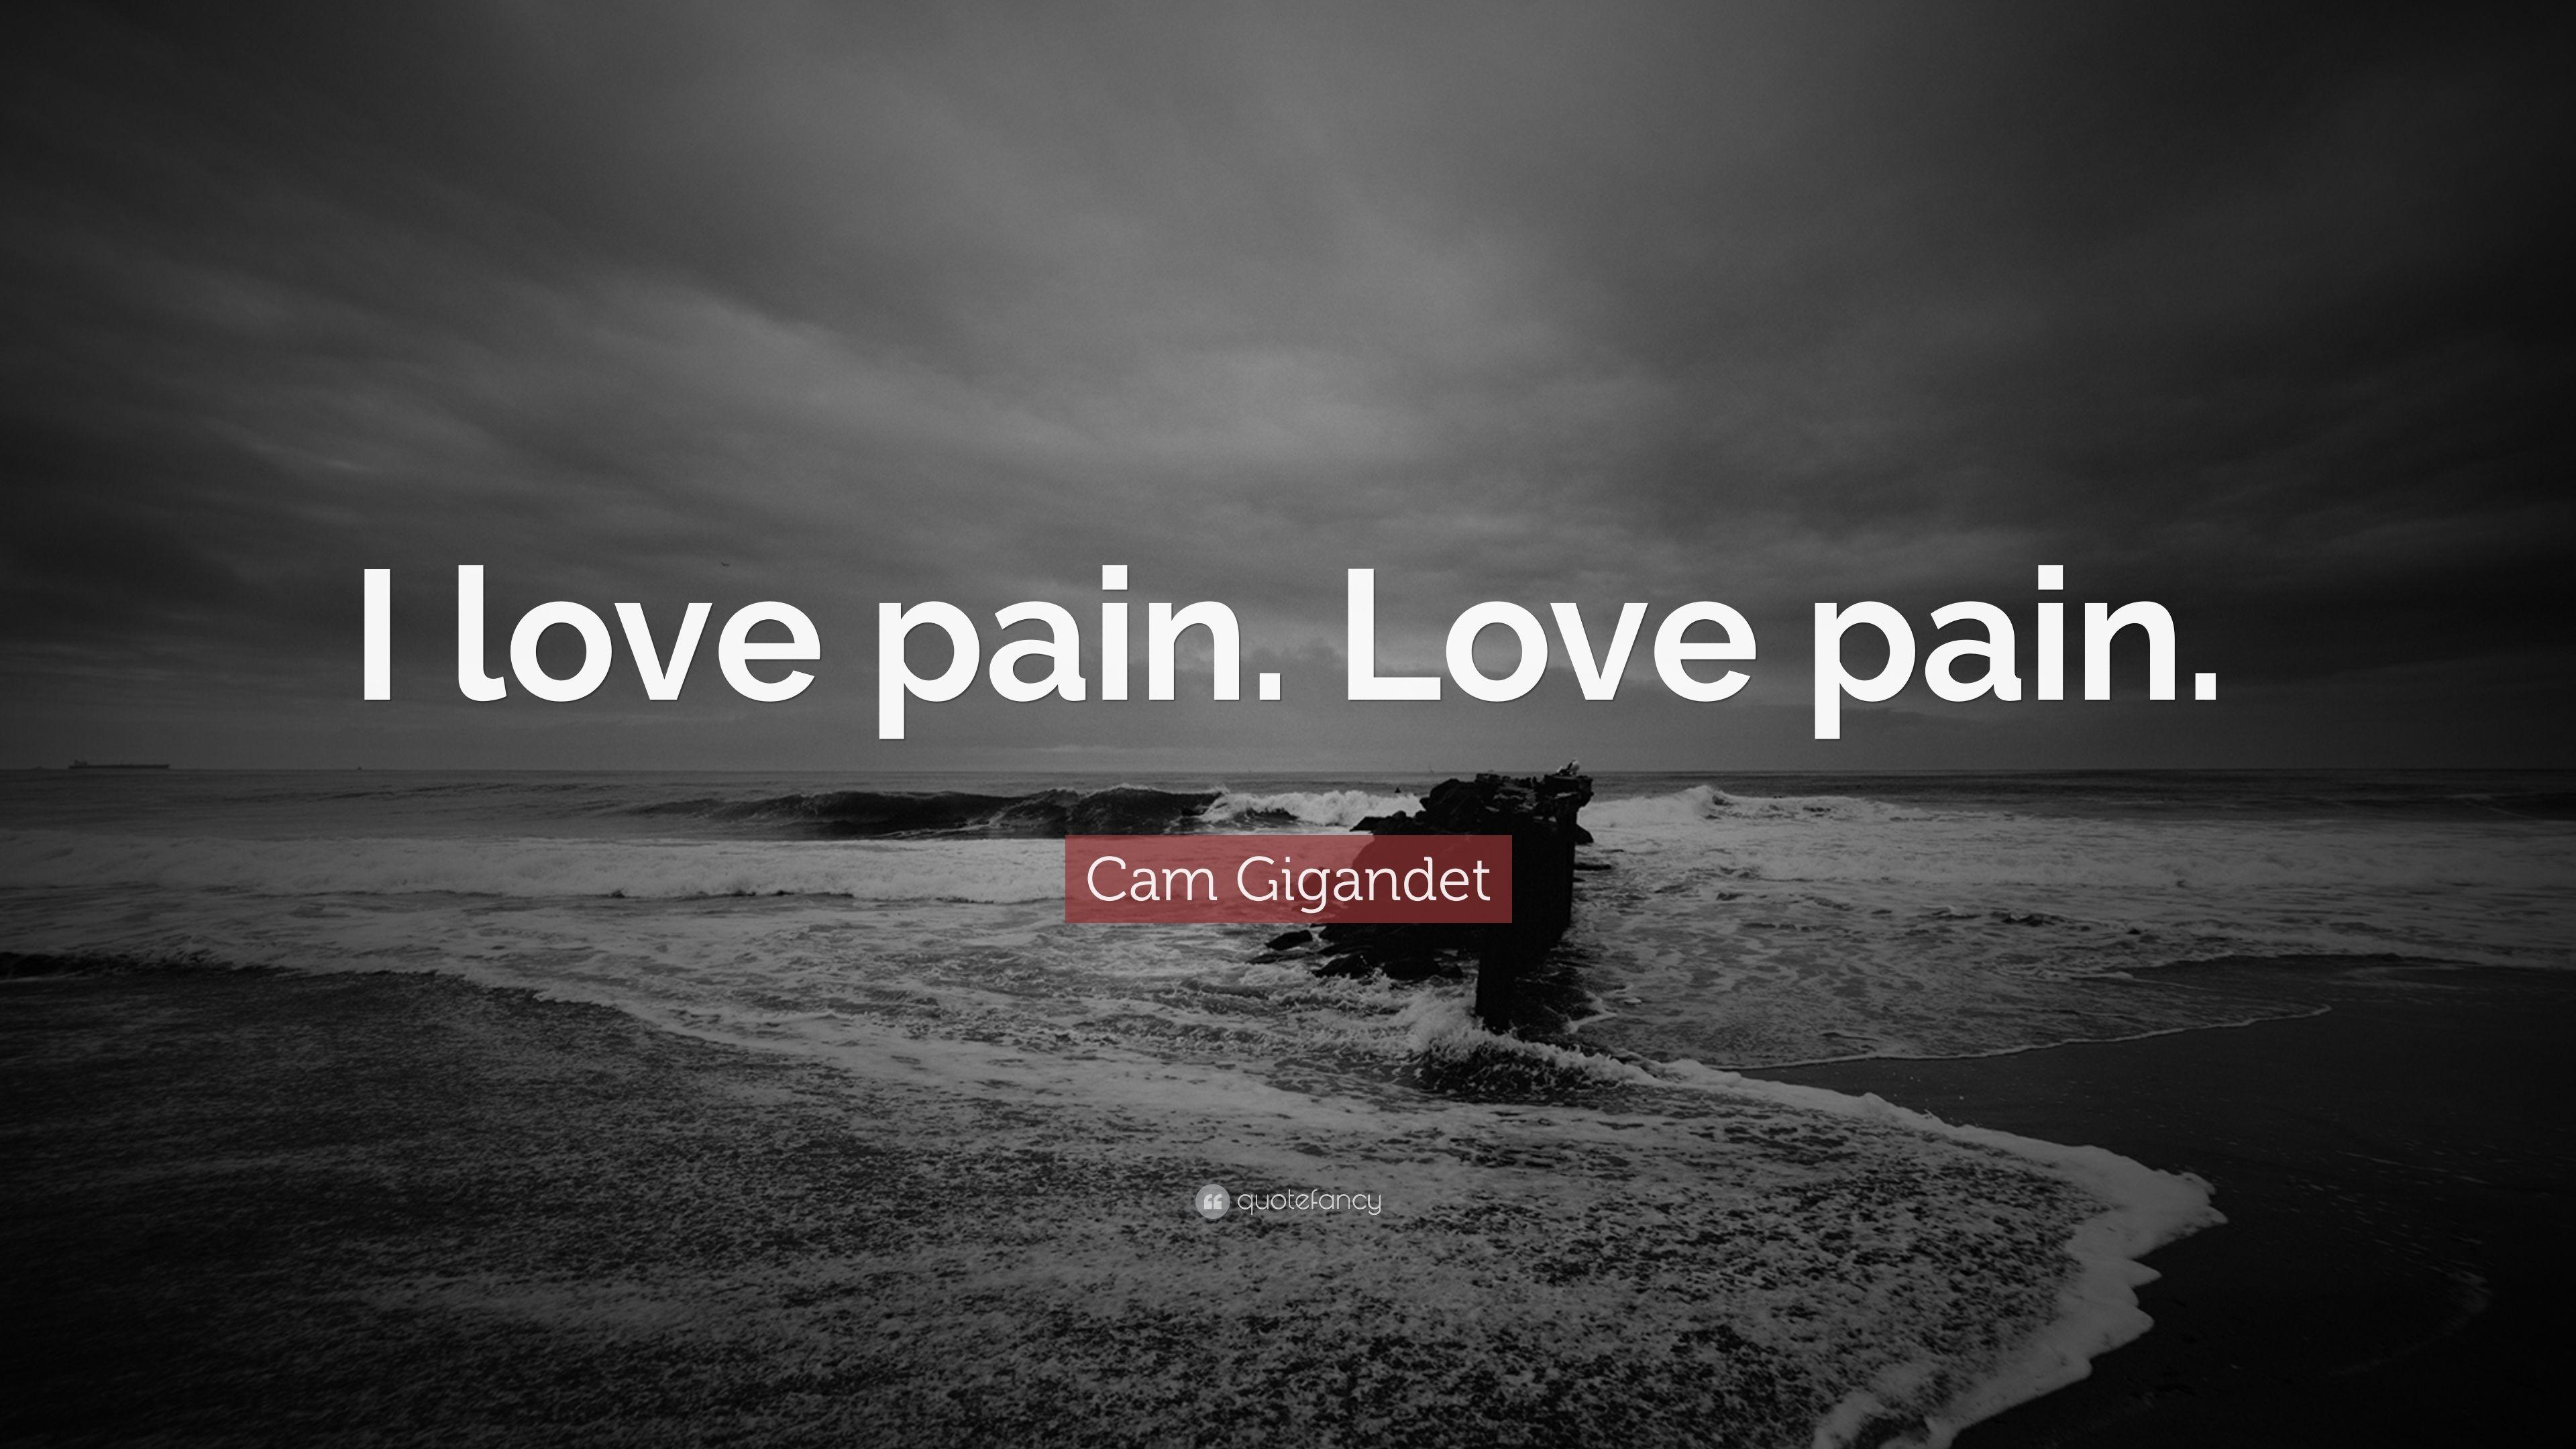 Cam Gigandet Quote: “I love pain. Love pain.” 7 wallpaper